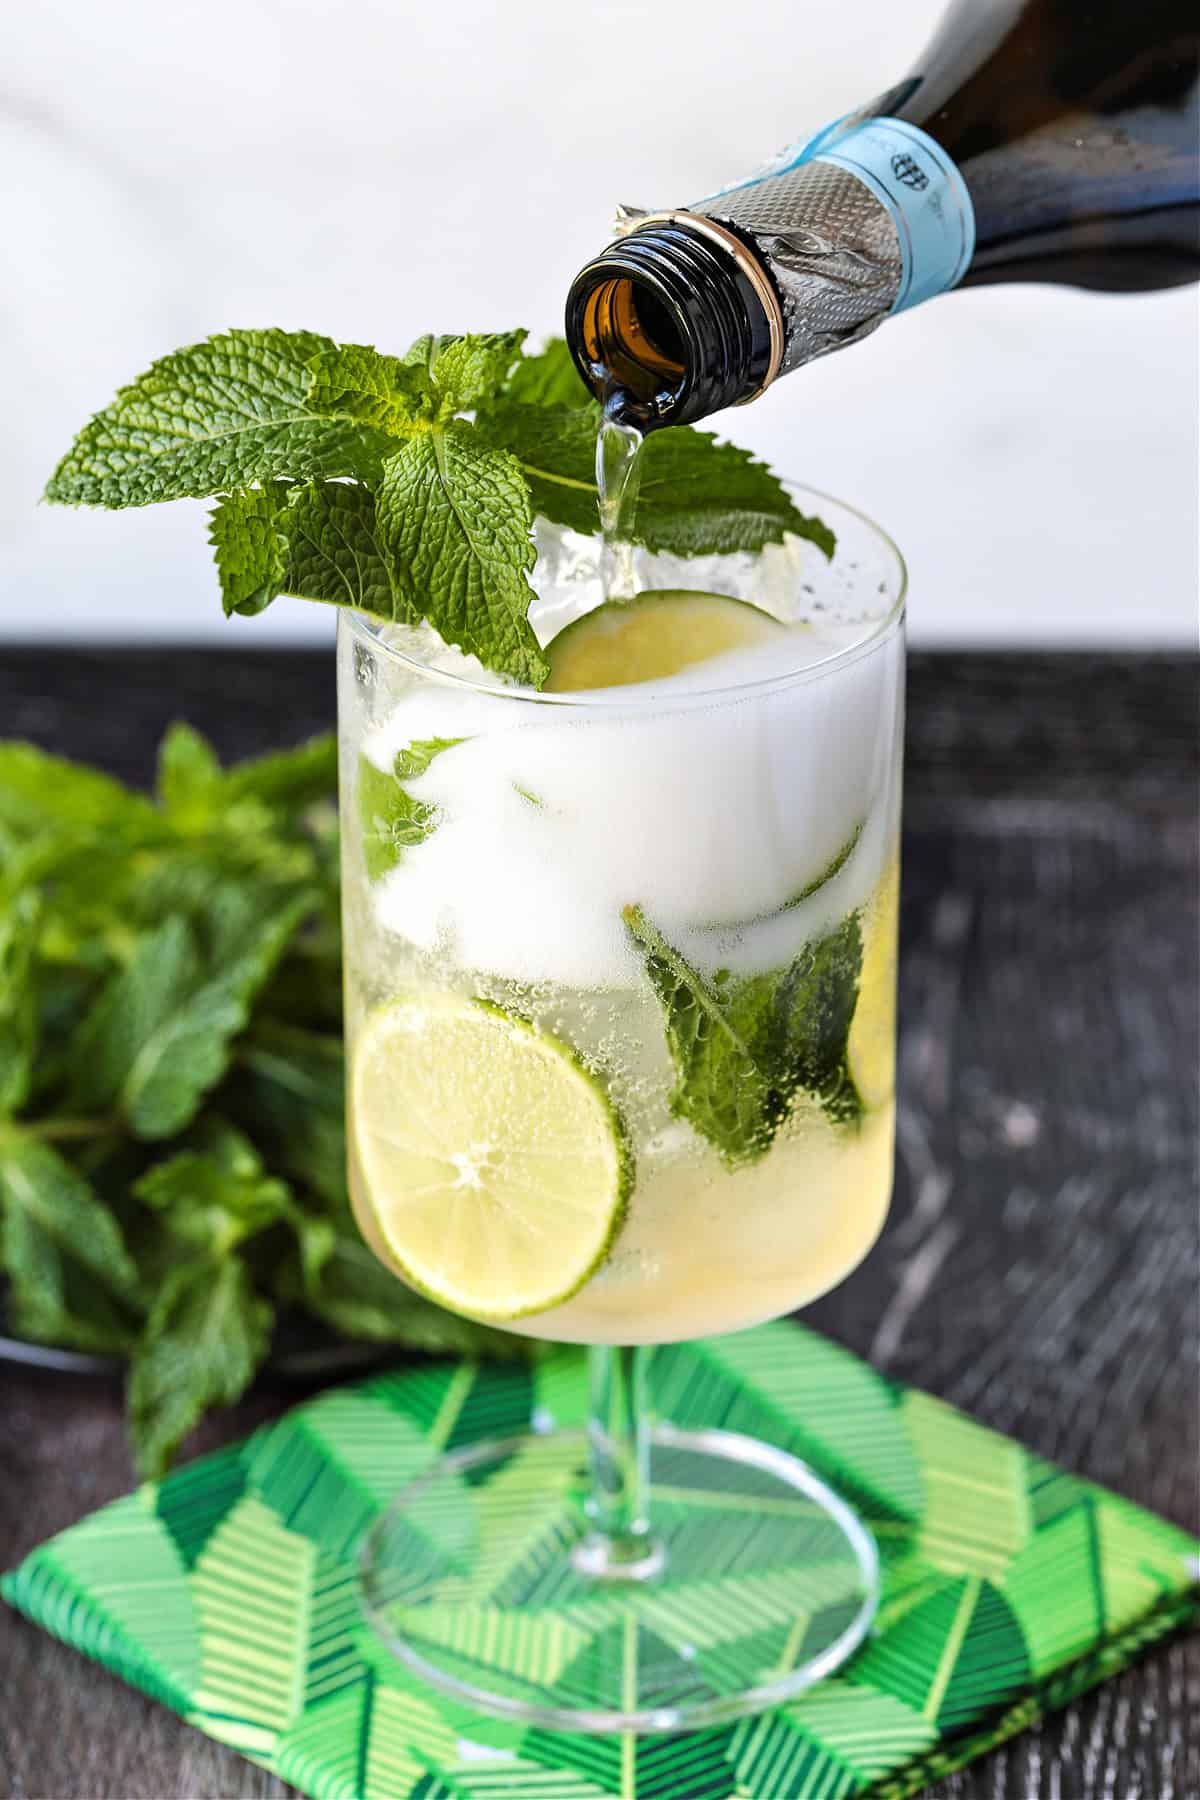 prosecco being poured into a glass with mint and limes